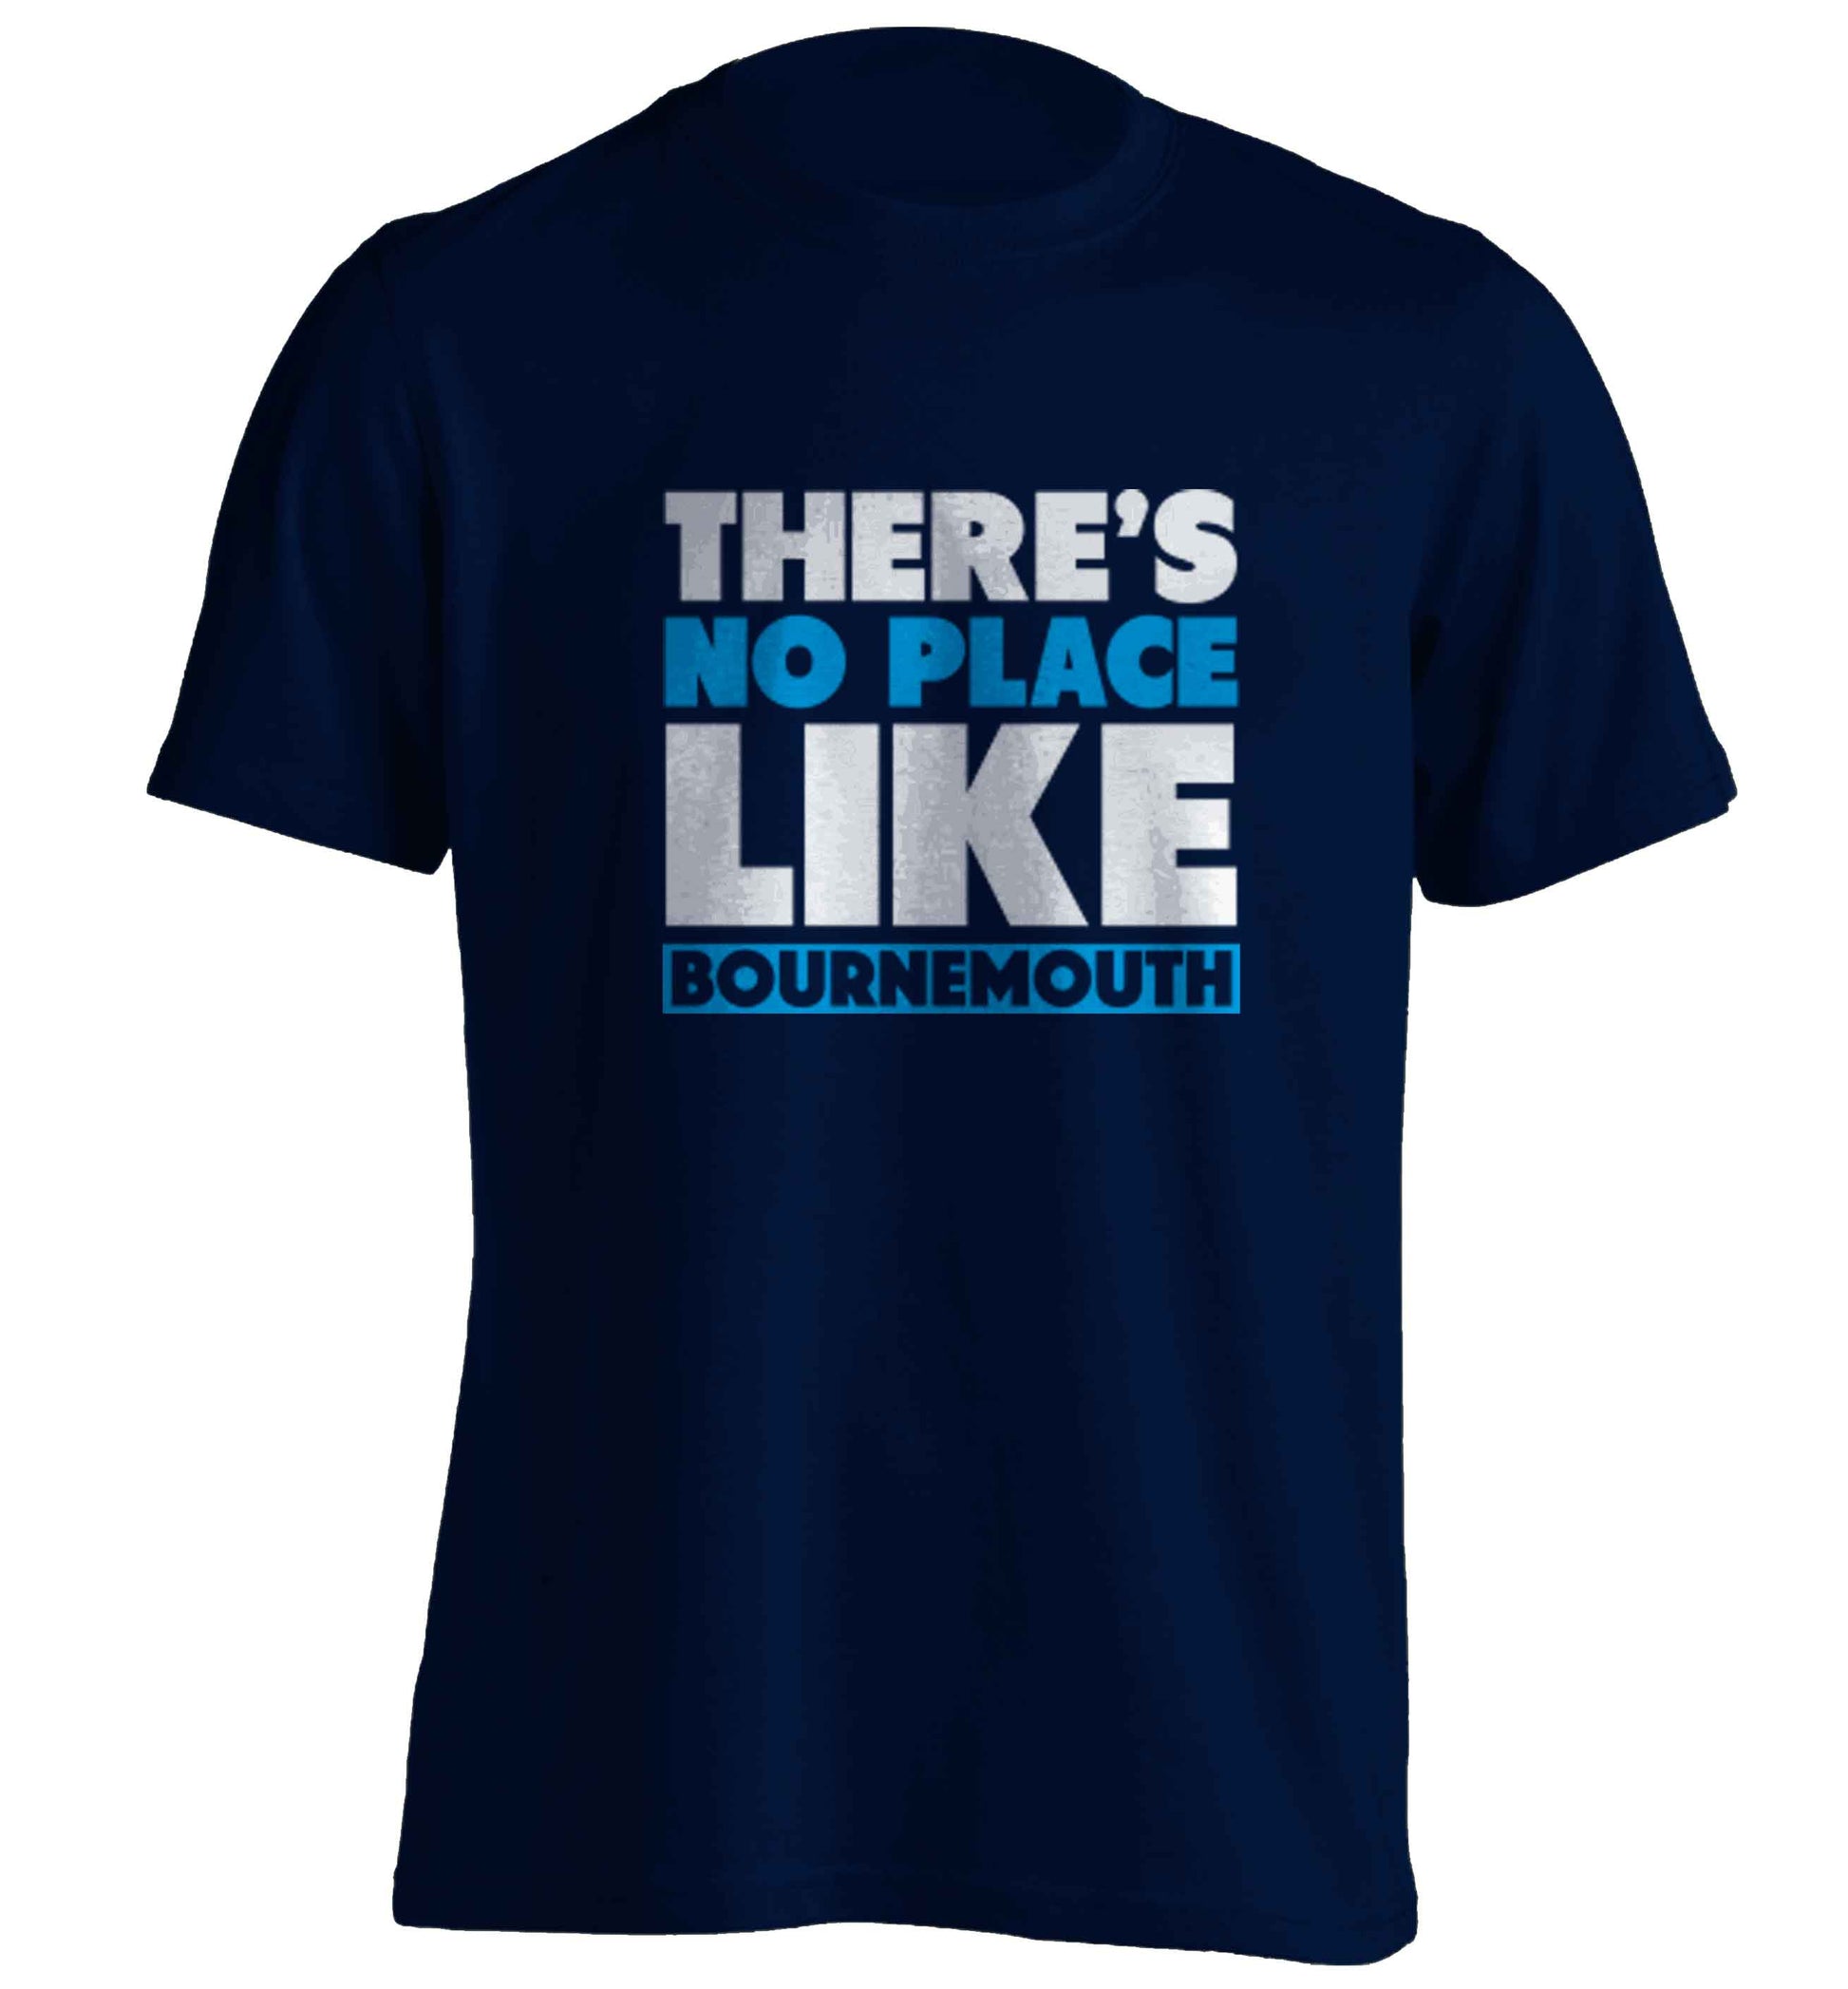 There's no place like Bournemouth adults unisex navy Tshirt 2XL